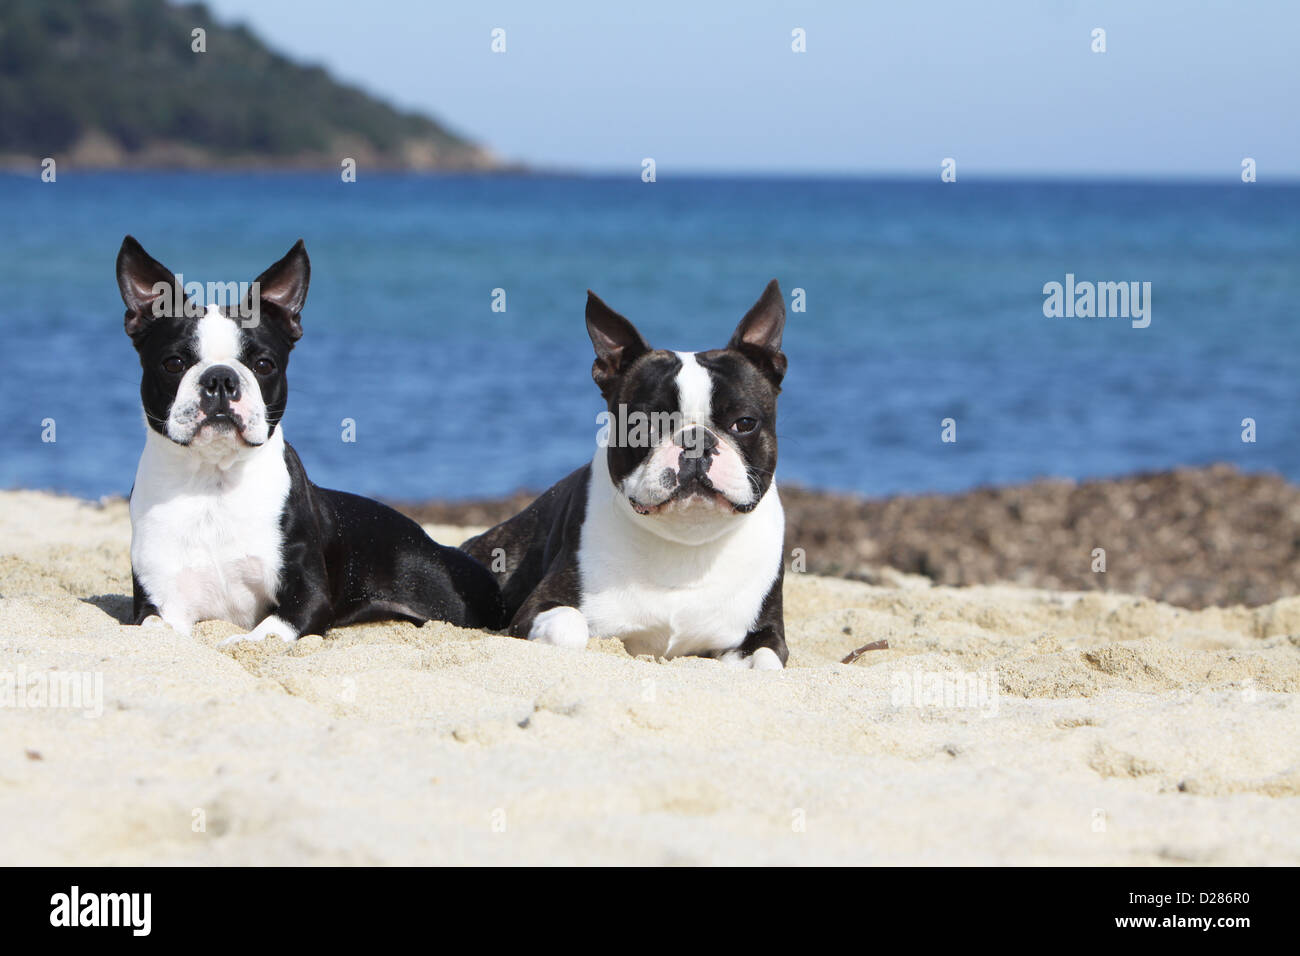 Dog Boston Terrier two adults different colors (white and brindle, white and black) lying on the beach Stock Photo